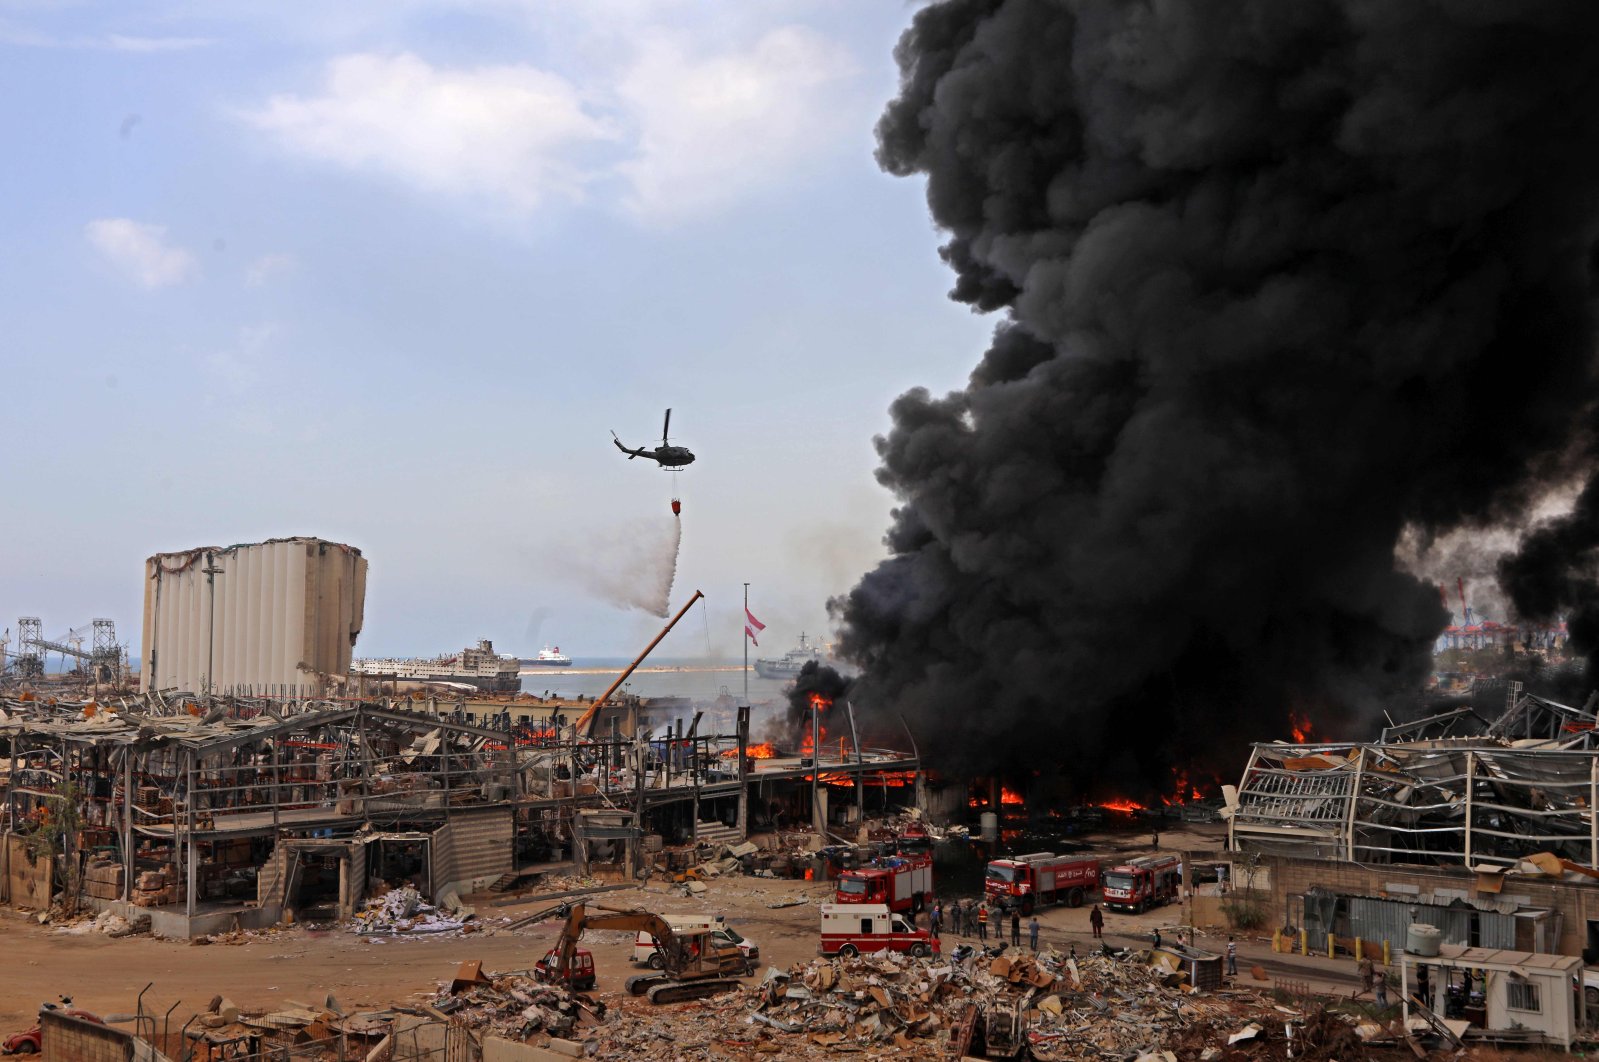 Lebanese firefighters try to put out a fire that broke out at Beirut's port area, on September 10, 2020. (AFP Photo)